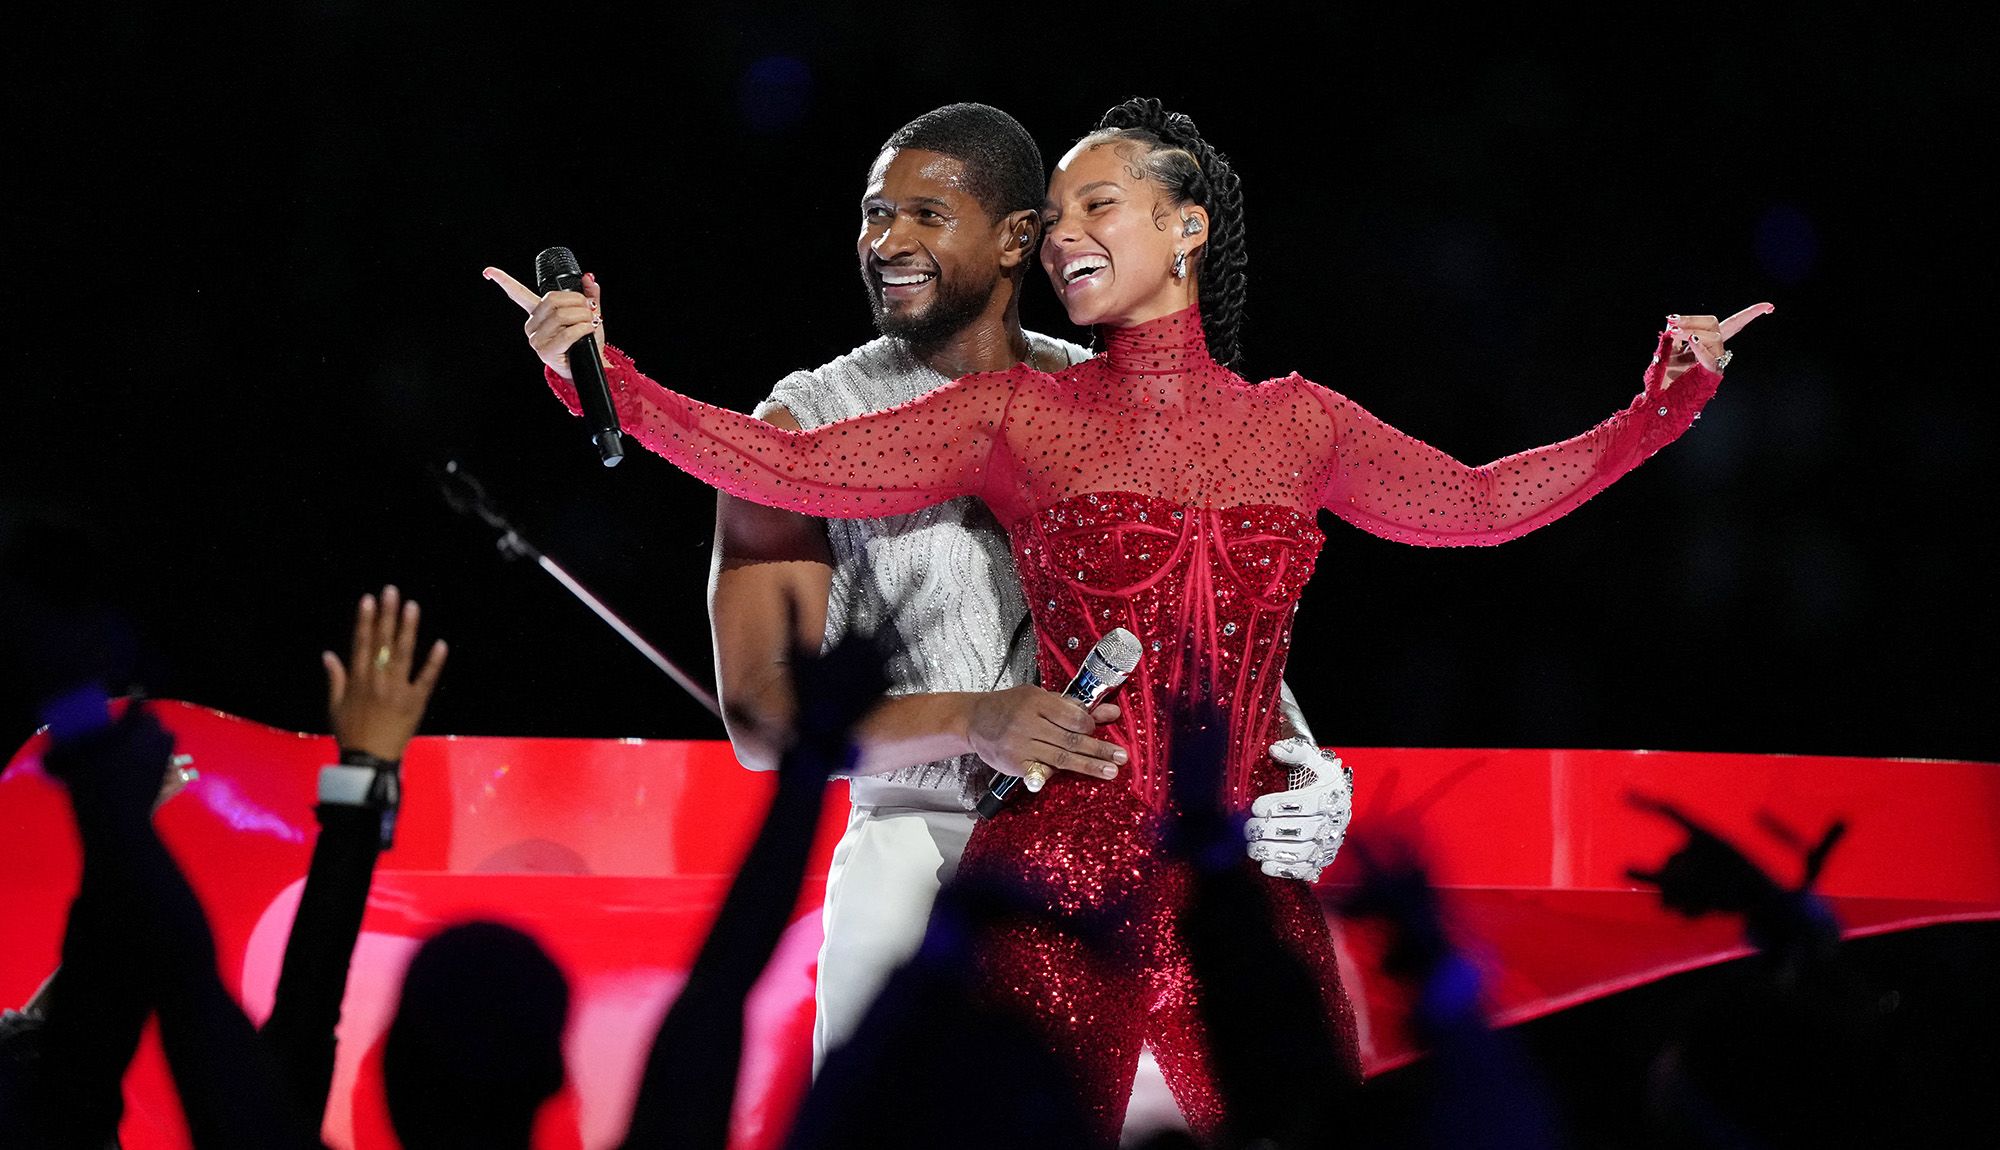 Usher and Alicia Keys, both wearing Dolce & Gabbana, perform during the halftime show at Super Bowl LVIII.